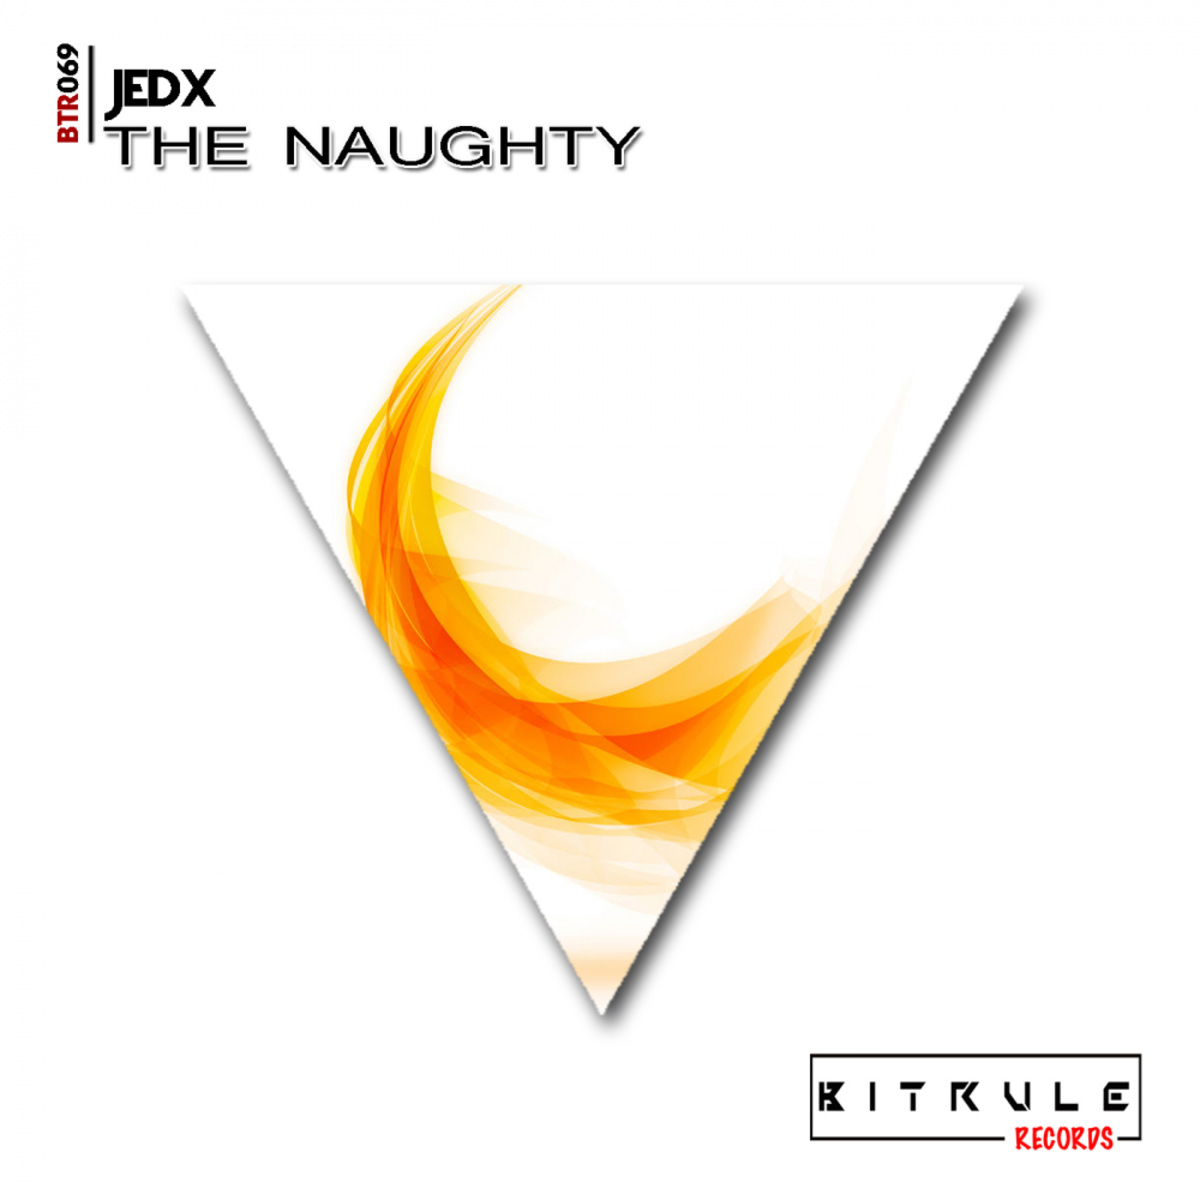 JedX - The Naughty / Bit Rule Records